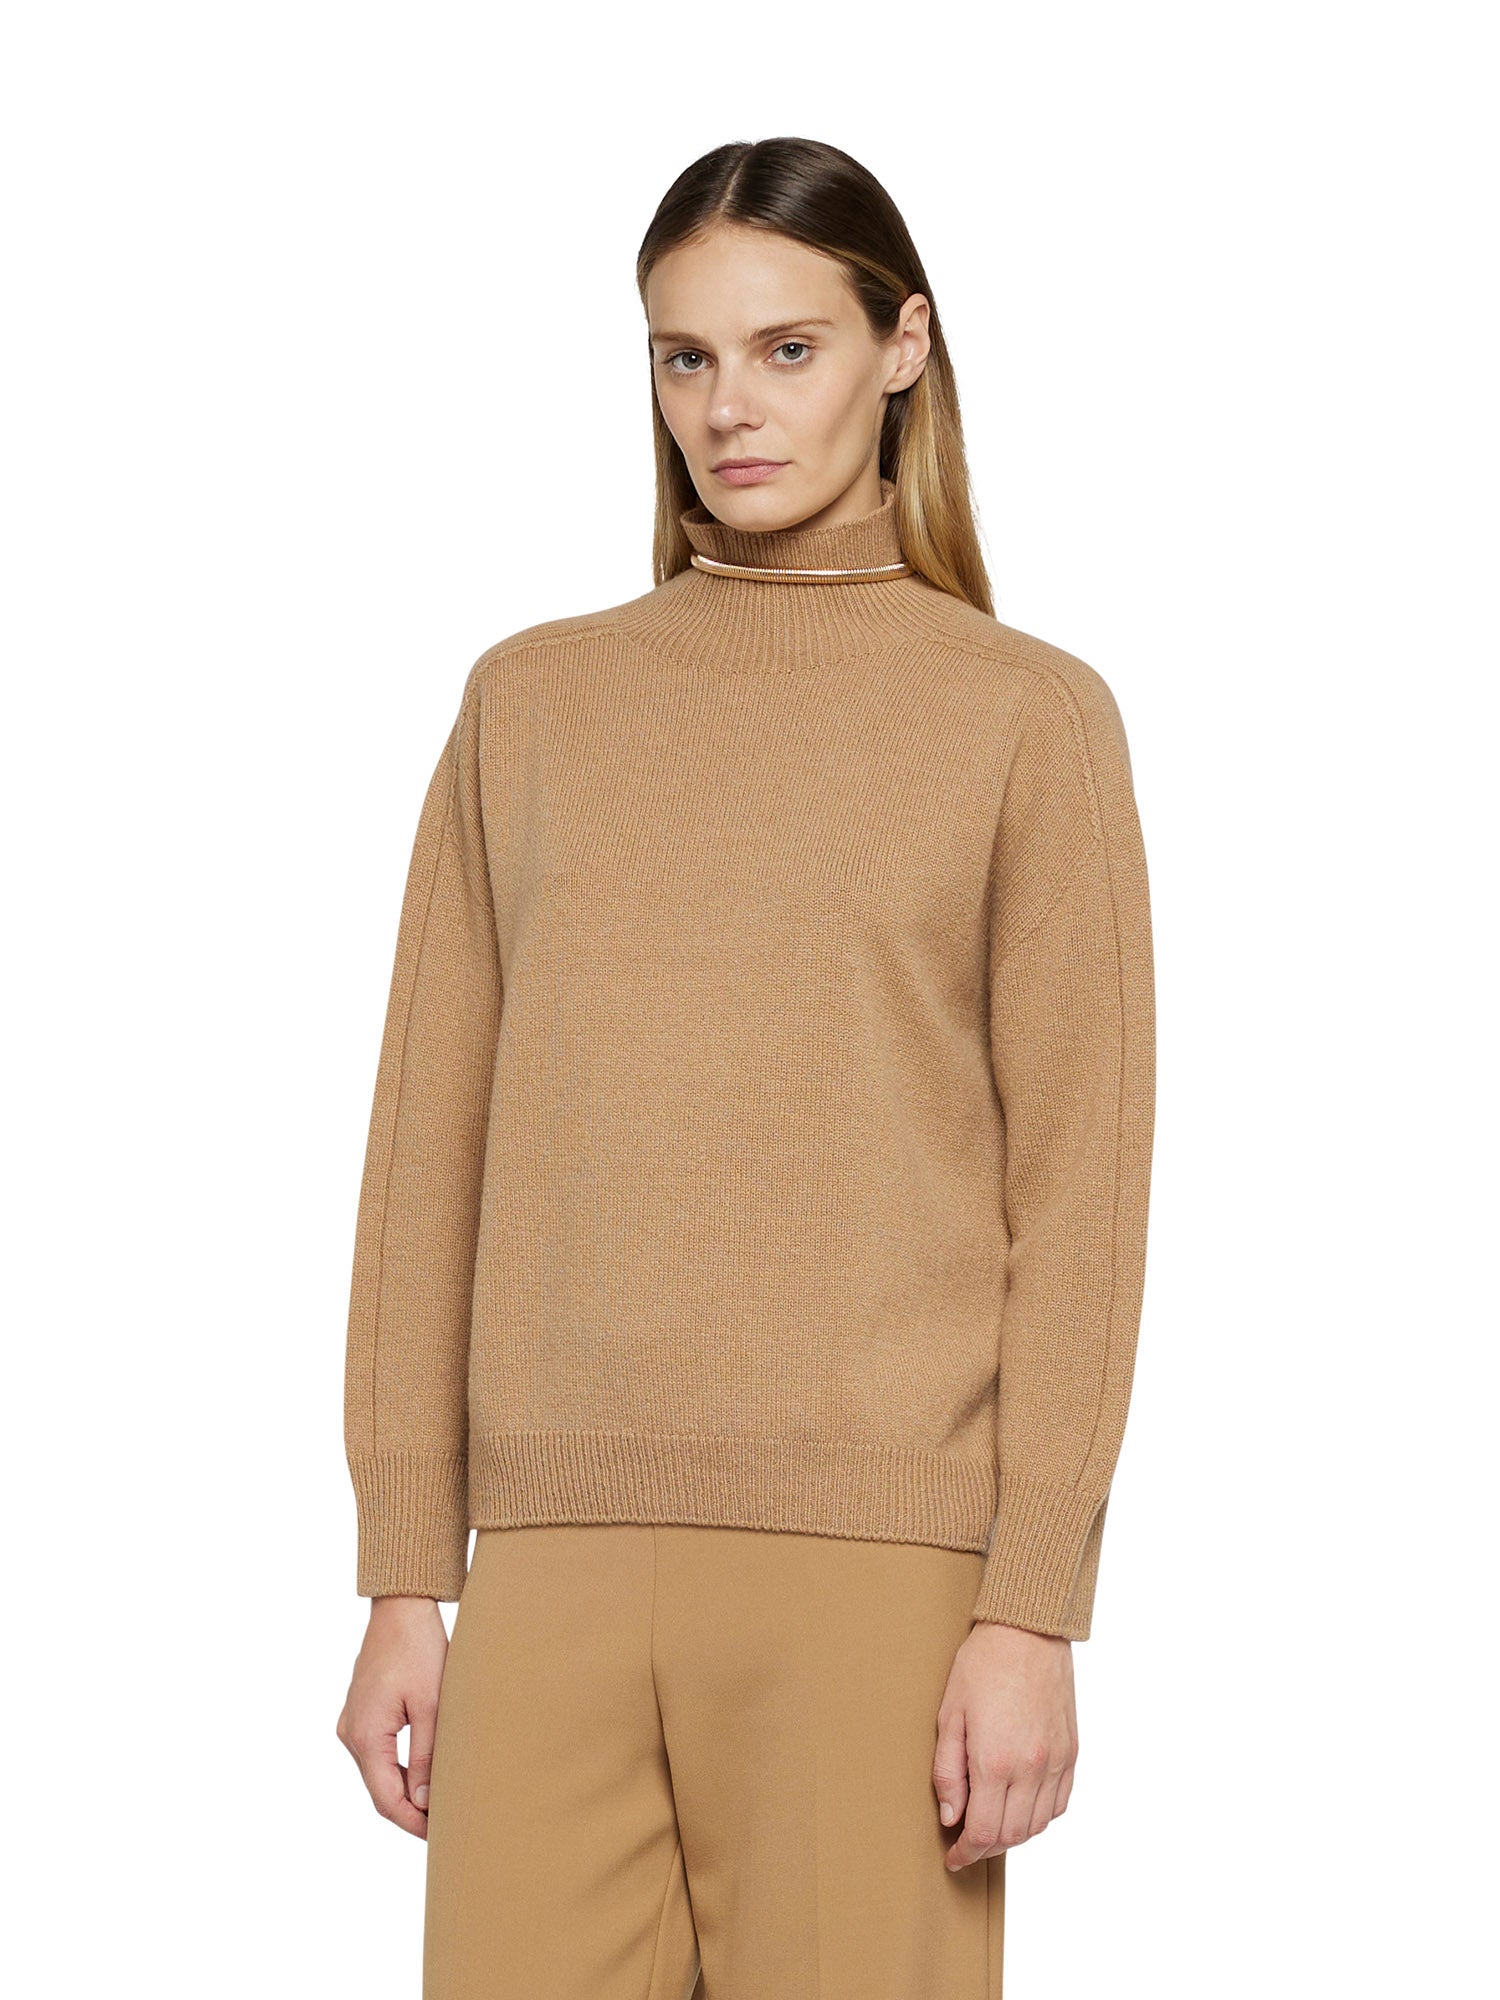 Cashmere wool turtleneck sweater with snake accessory in the collar –  simonacorsellini